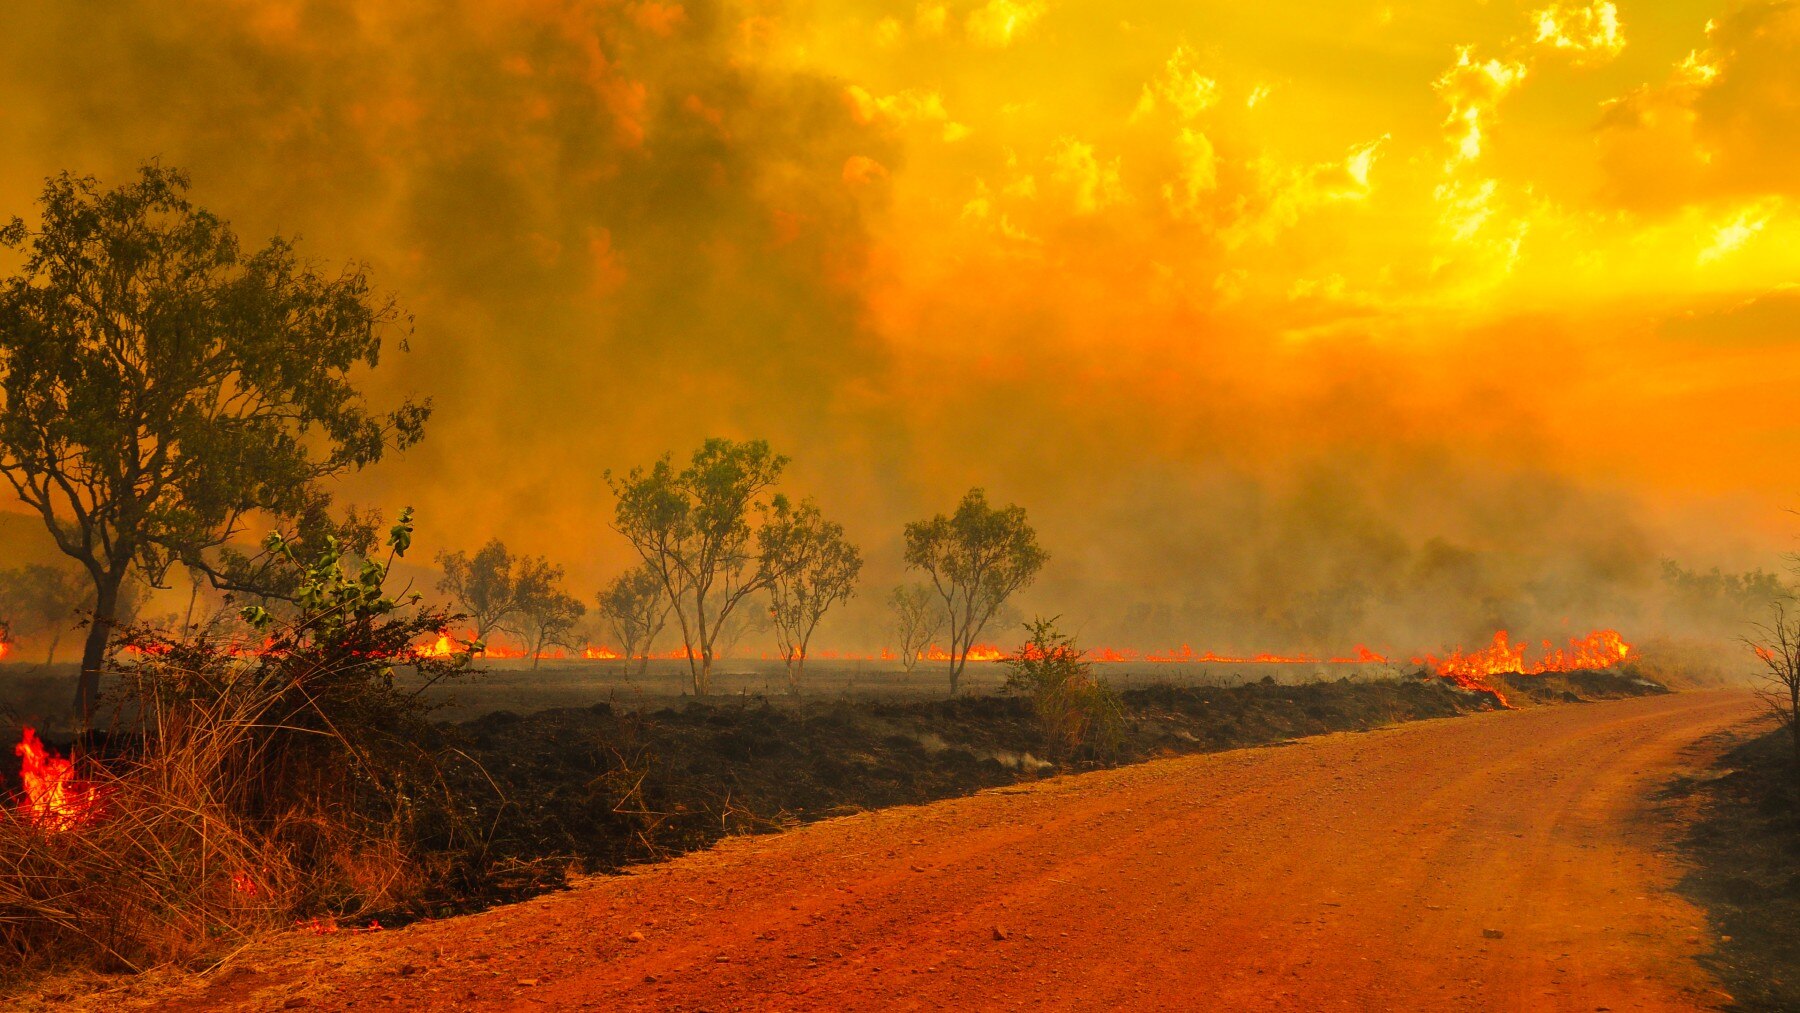 How to prepare for bush fire in your area